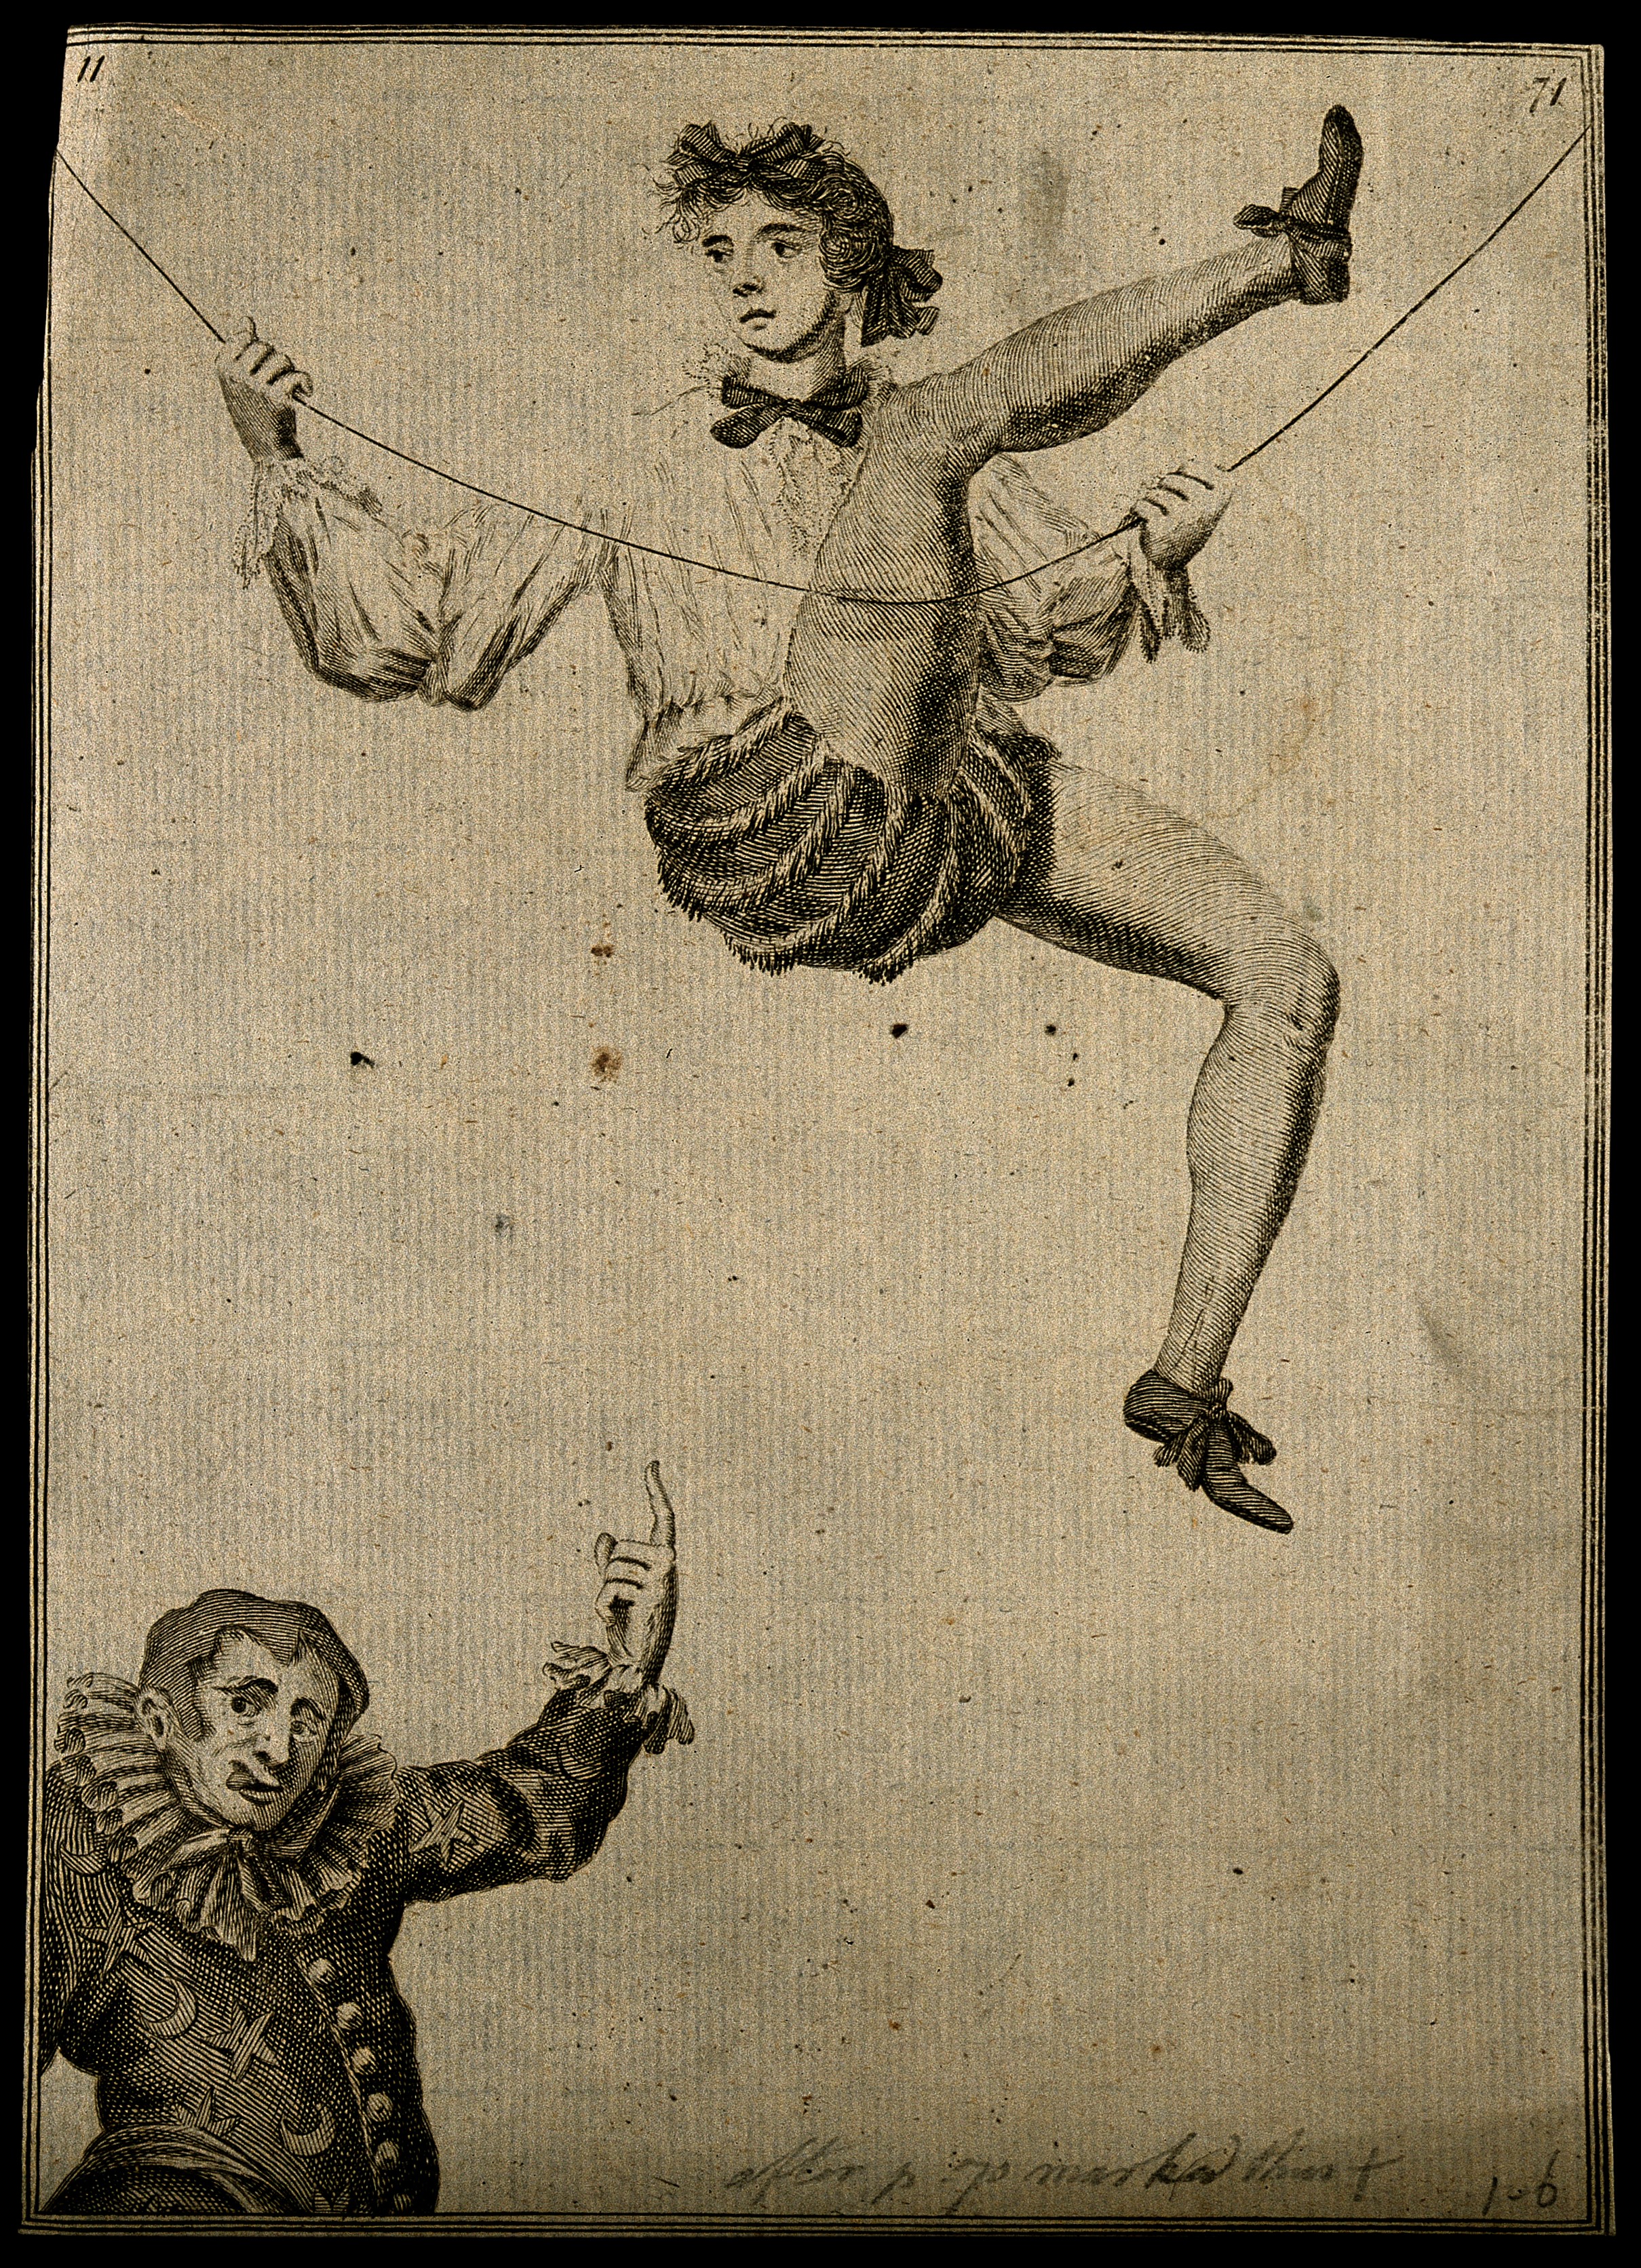 File:A tightrope walker above a clown. Engraving. Wellcome V0007470.jpg -  Wikimedia Commons